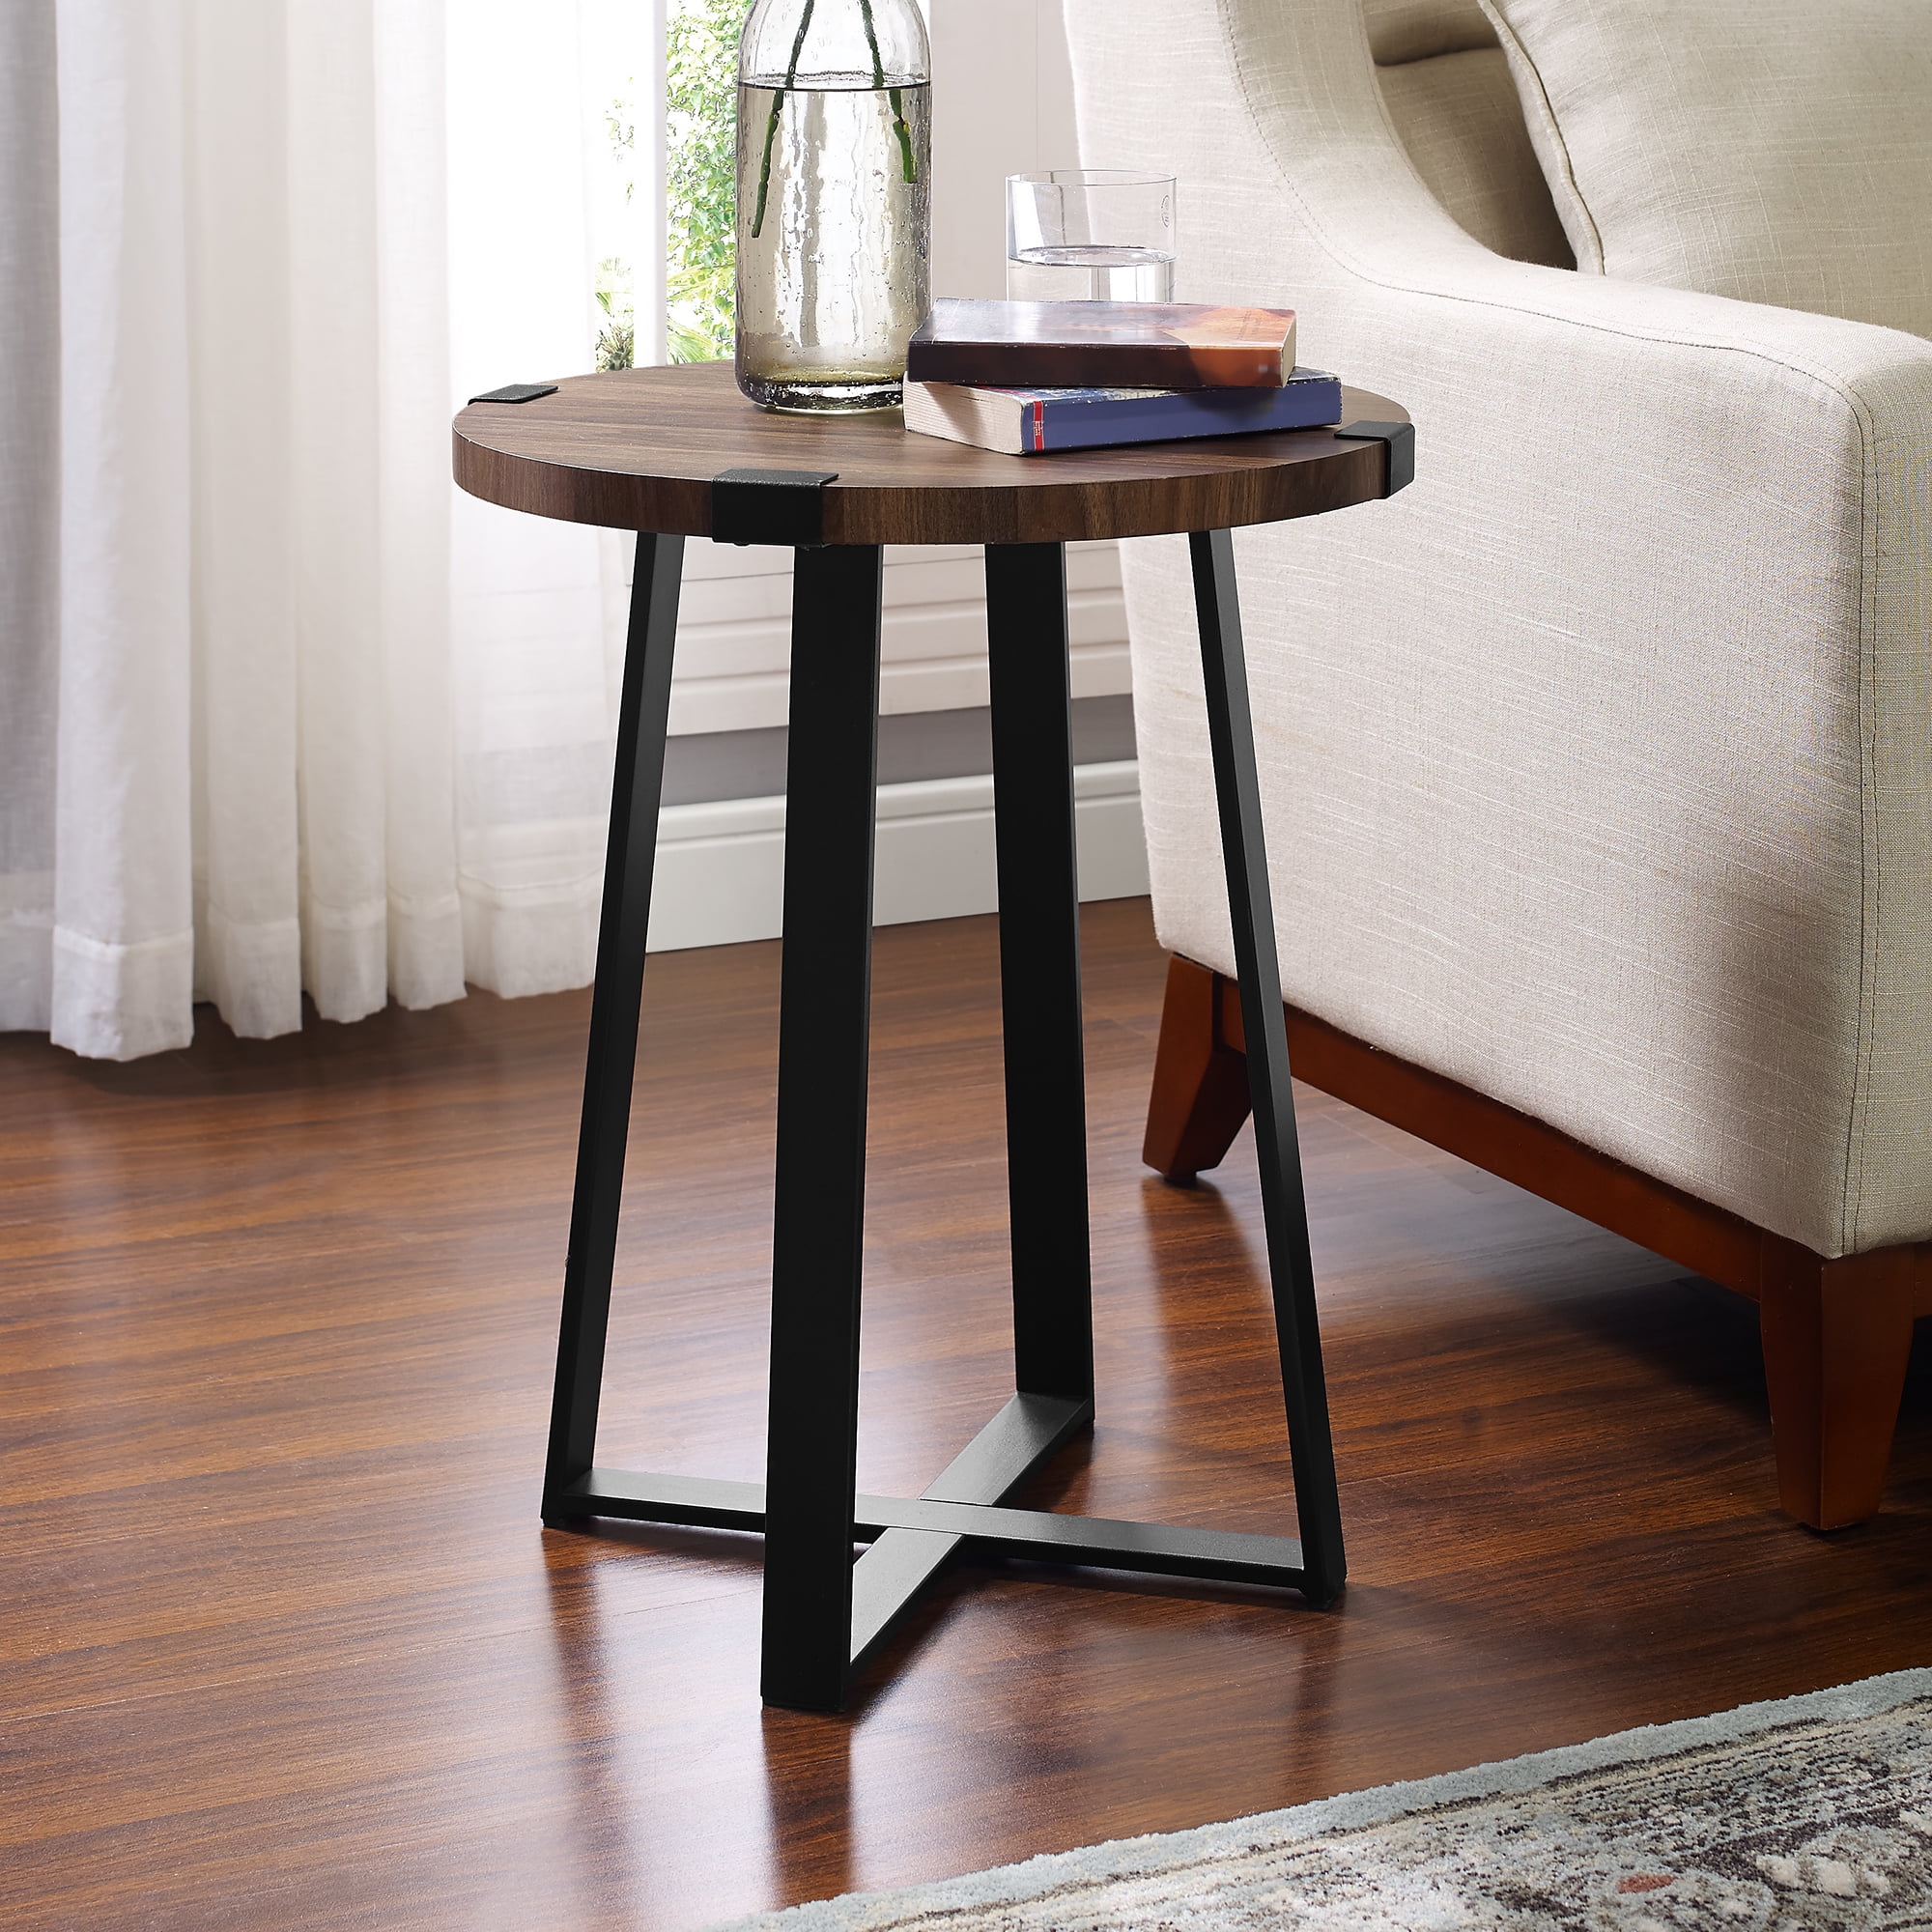 Rustic Wood and Metal Round Dark Walnut End Table by Manor Park, Walnut